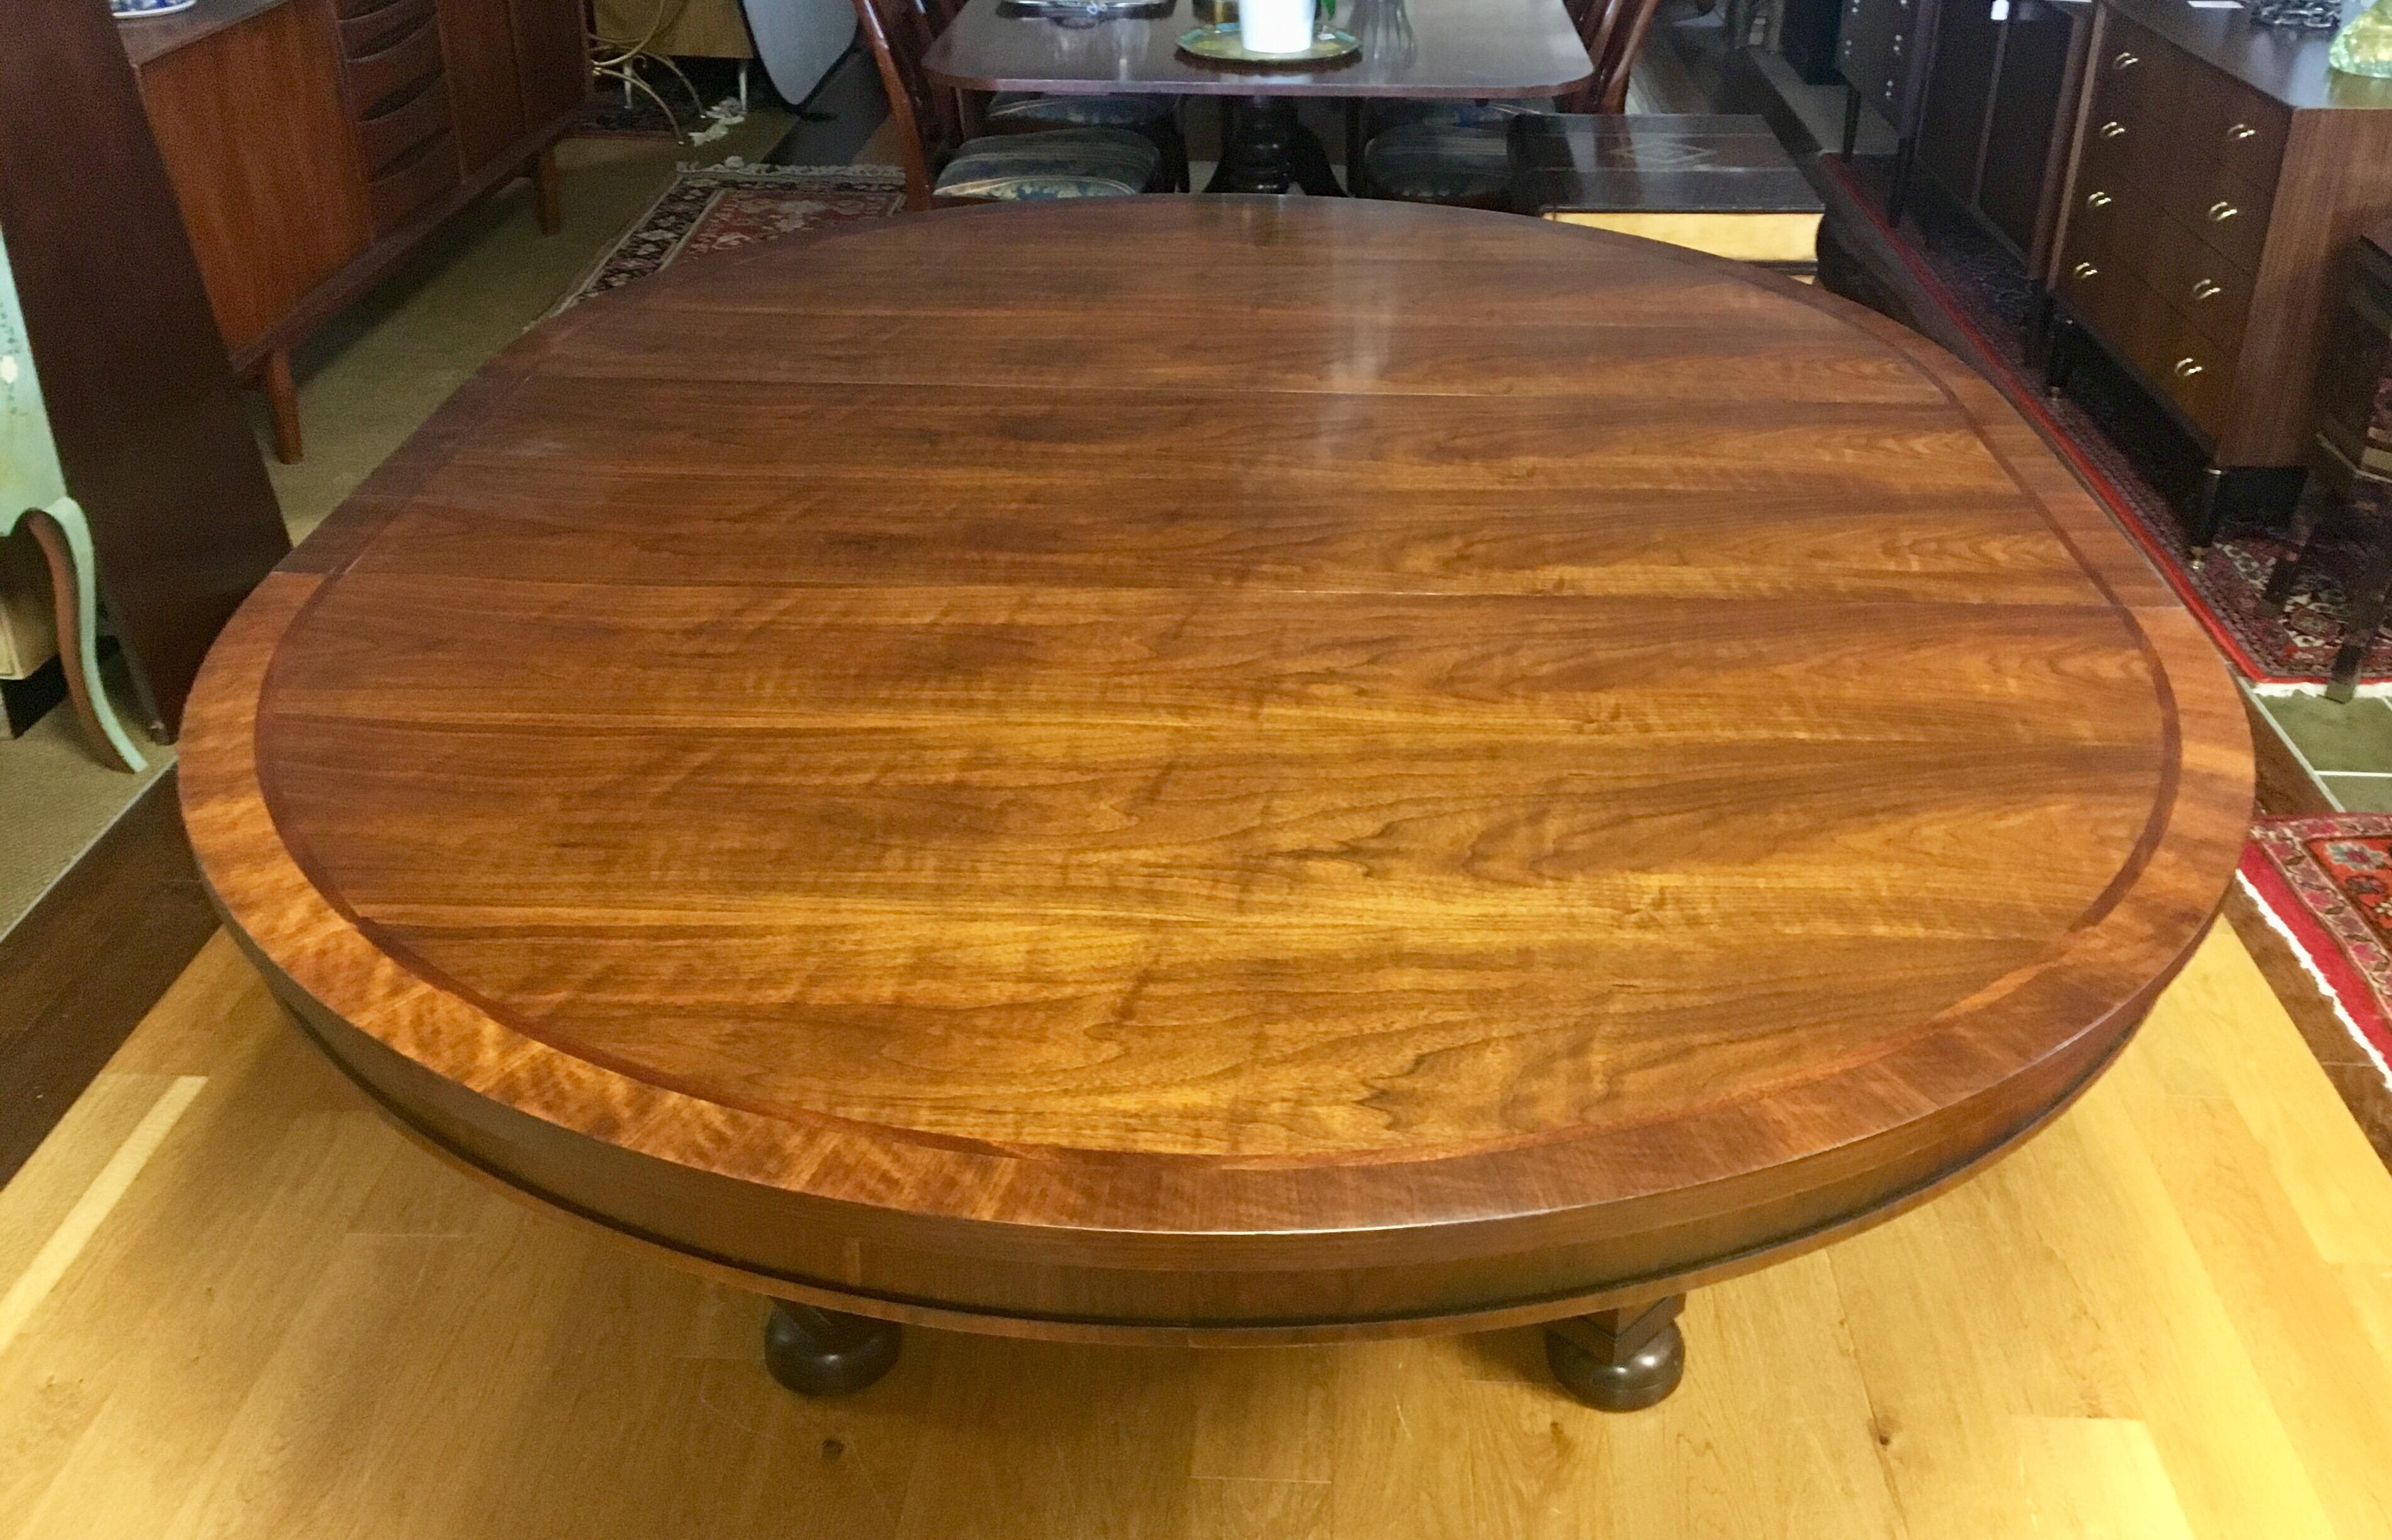 Ralph Lauren in partnership with Henredon Furniture large circular pedestal walnut and mahogany dining table that is shaped more oval when large 20 inch leaf is in. Without leaf it is 64 inches round and substantial. It sits on a gorgeous pedestal.